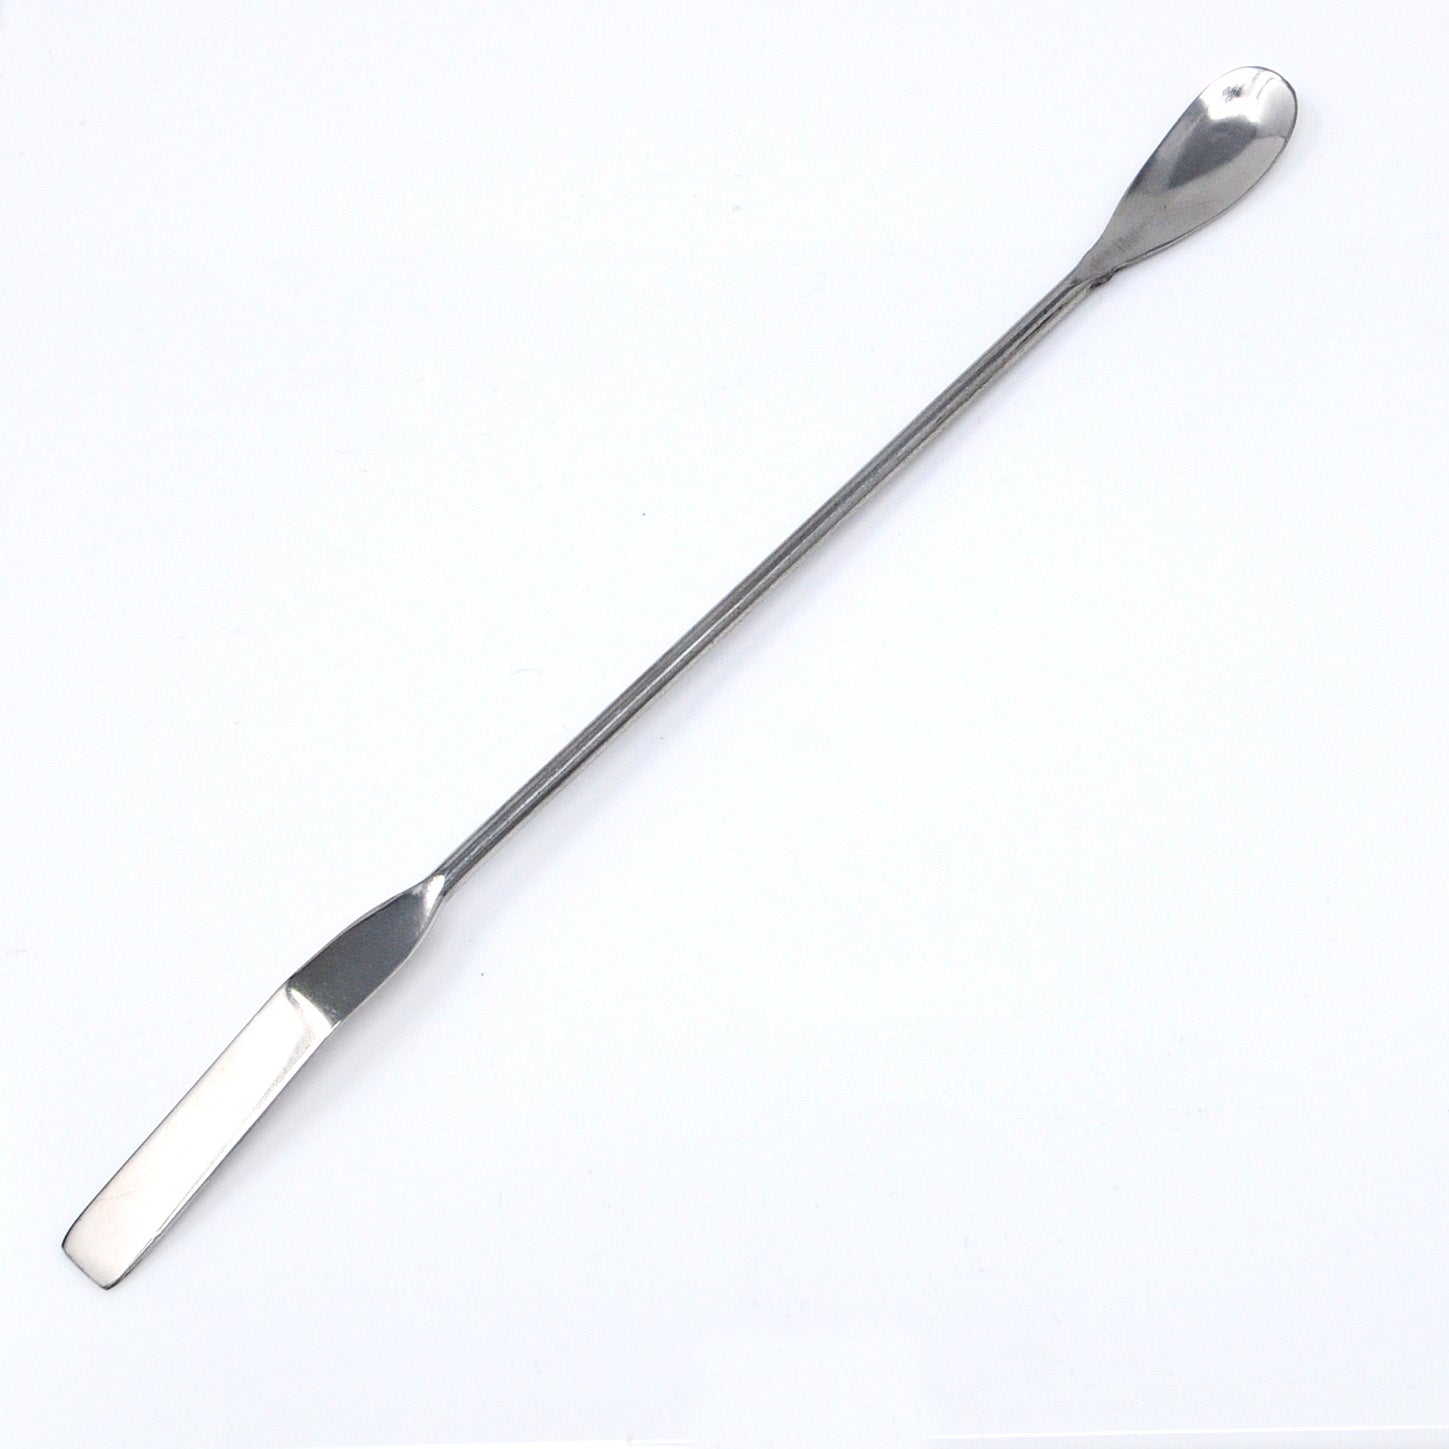 Stainless Steel Lab Spatula | Lotioncrafter